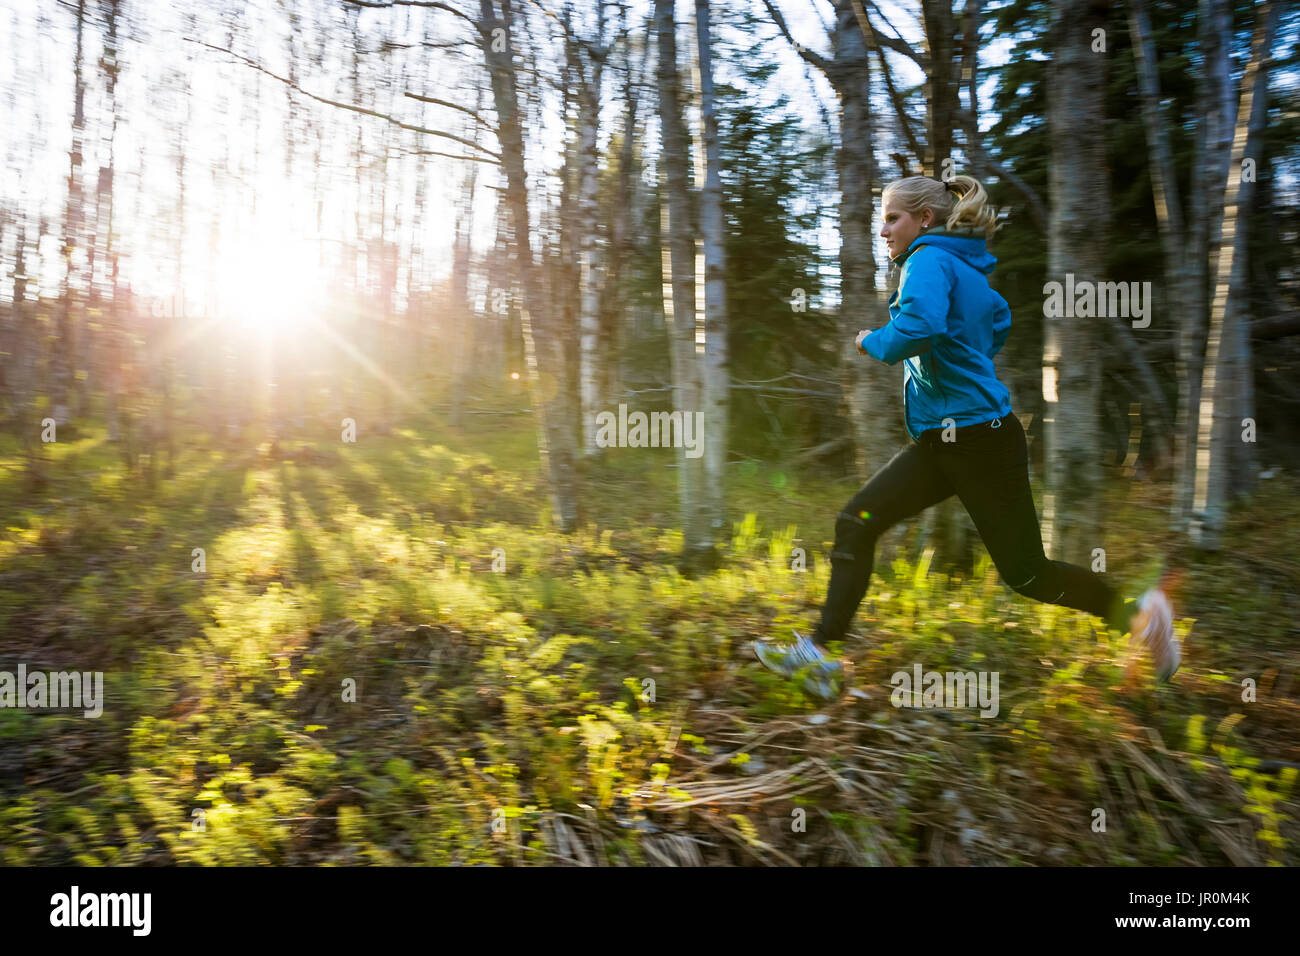 A Young Woman Running Across The Plants Of The Forest Floor In A Forest; Homer, Alaska, United States Of America Stock Photo